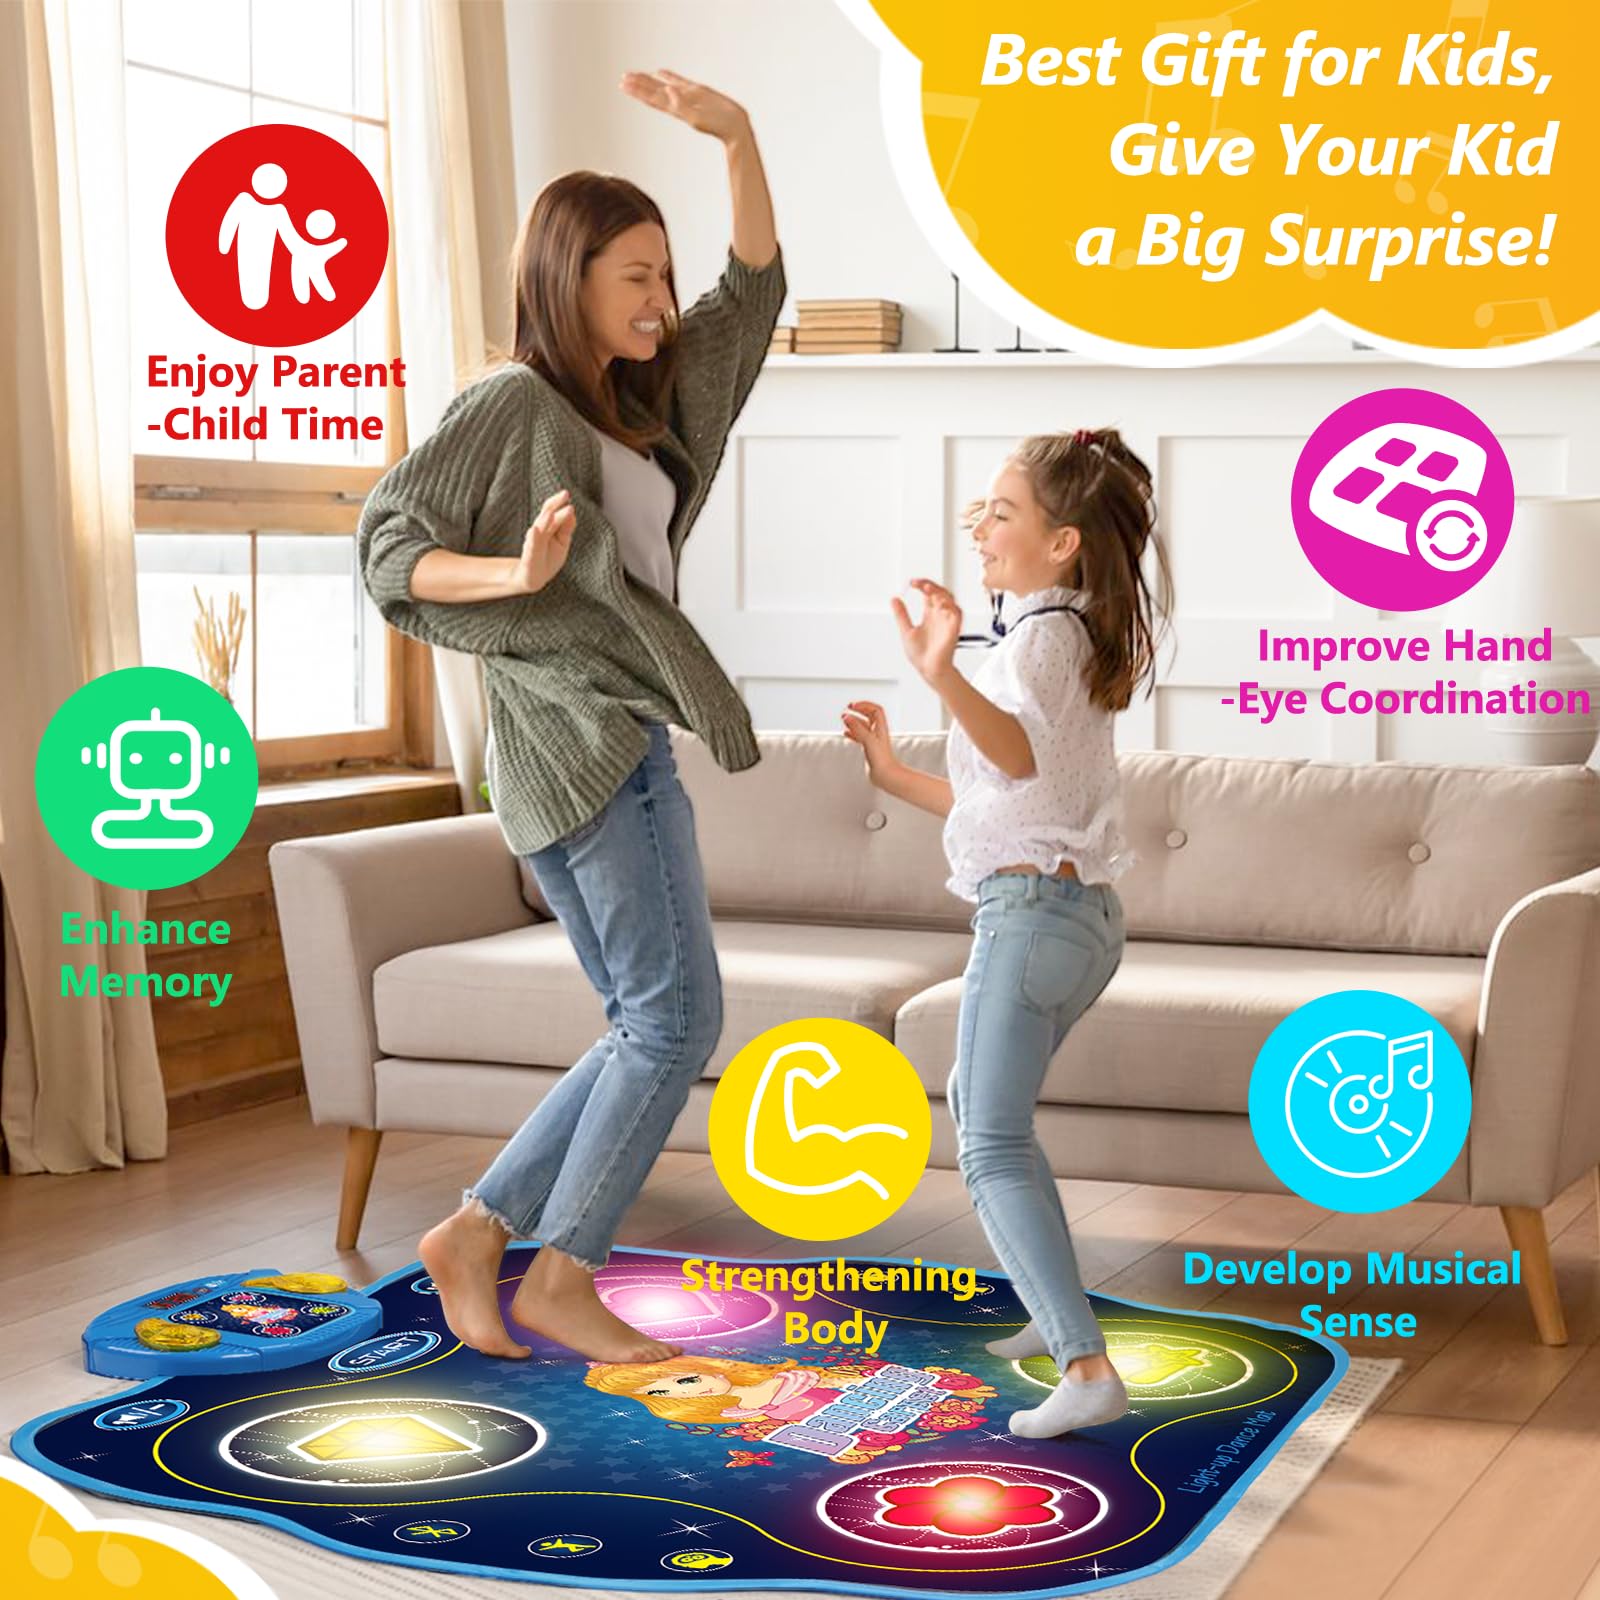 Dance Mat Toys Gift for 3-12 Year Old Kids Girls, Electronic Light Up Dance Pad Mats with Bluetooth 9 Levels Game, Christmas Birthday Gifts Dancing Mat for Kids Girls Boys Ages 3 4 5 6 7 8 9 10 11 12